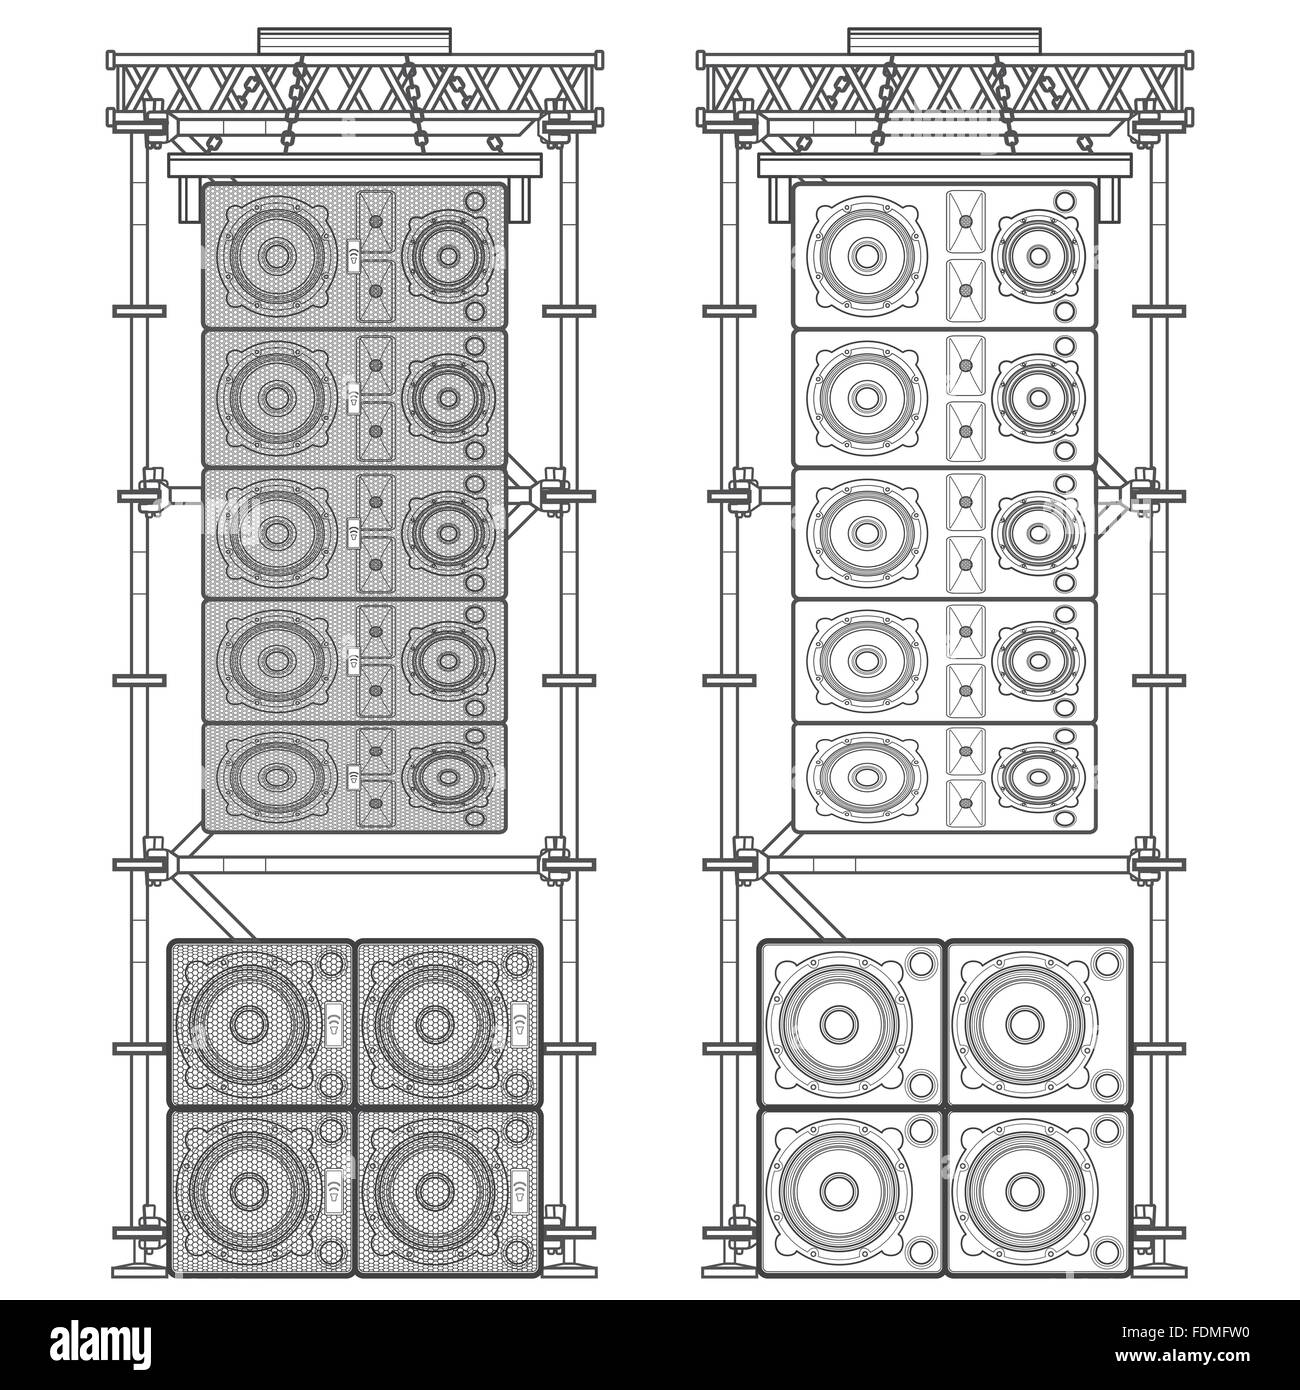 vector monochrome outline event line array massive loudspeakers satellites suspended metal scaffold subwoofers isolated illustra Stock Vector